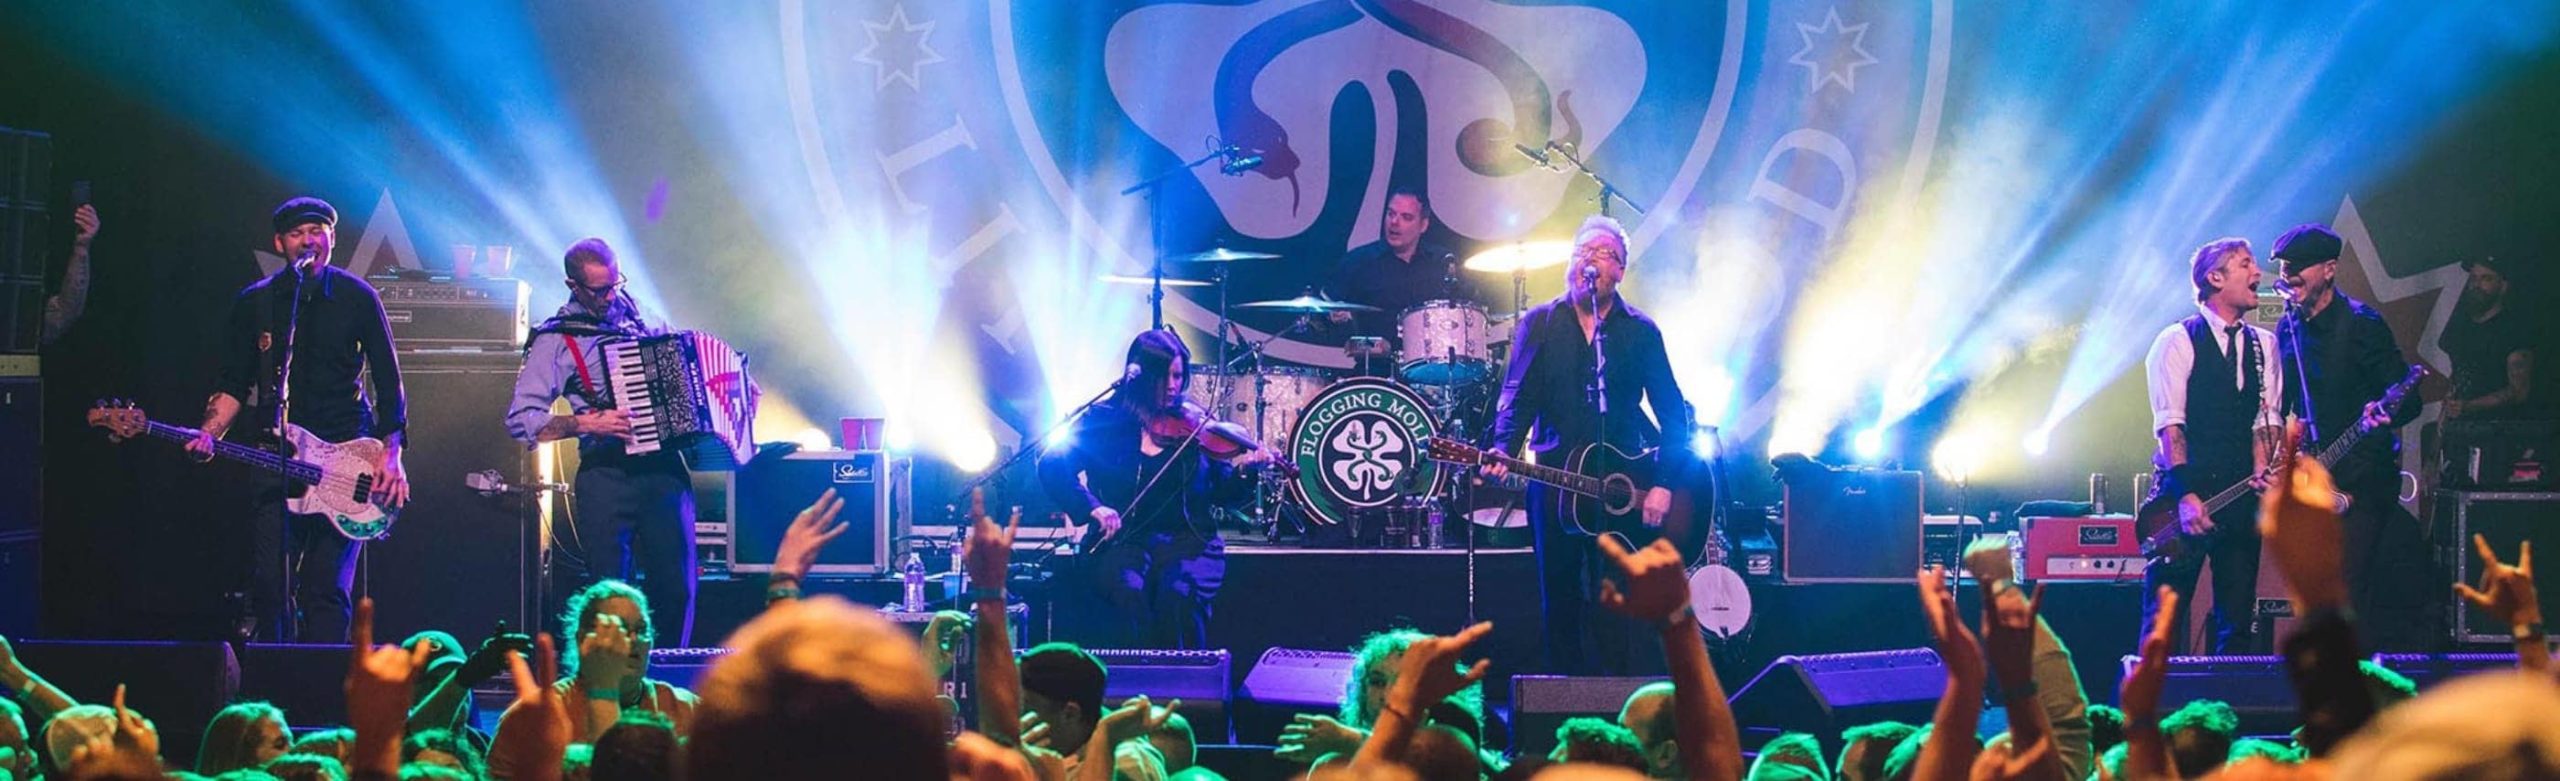 Flogging Molly Gears Up for Their High-Spirited Return to Montana (Playlist) Image